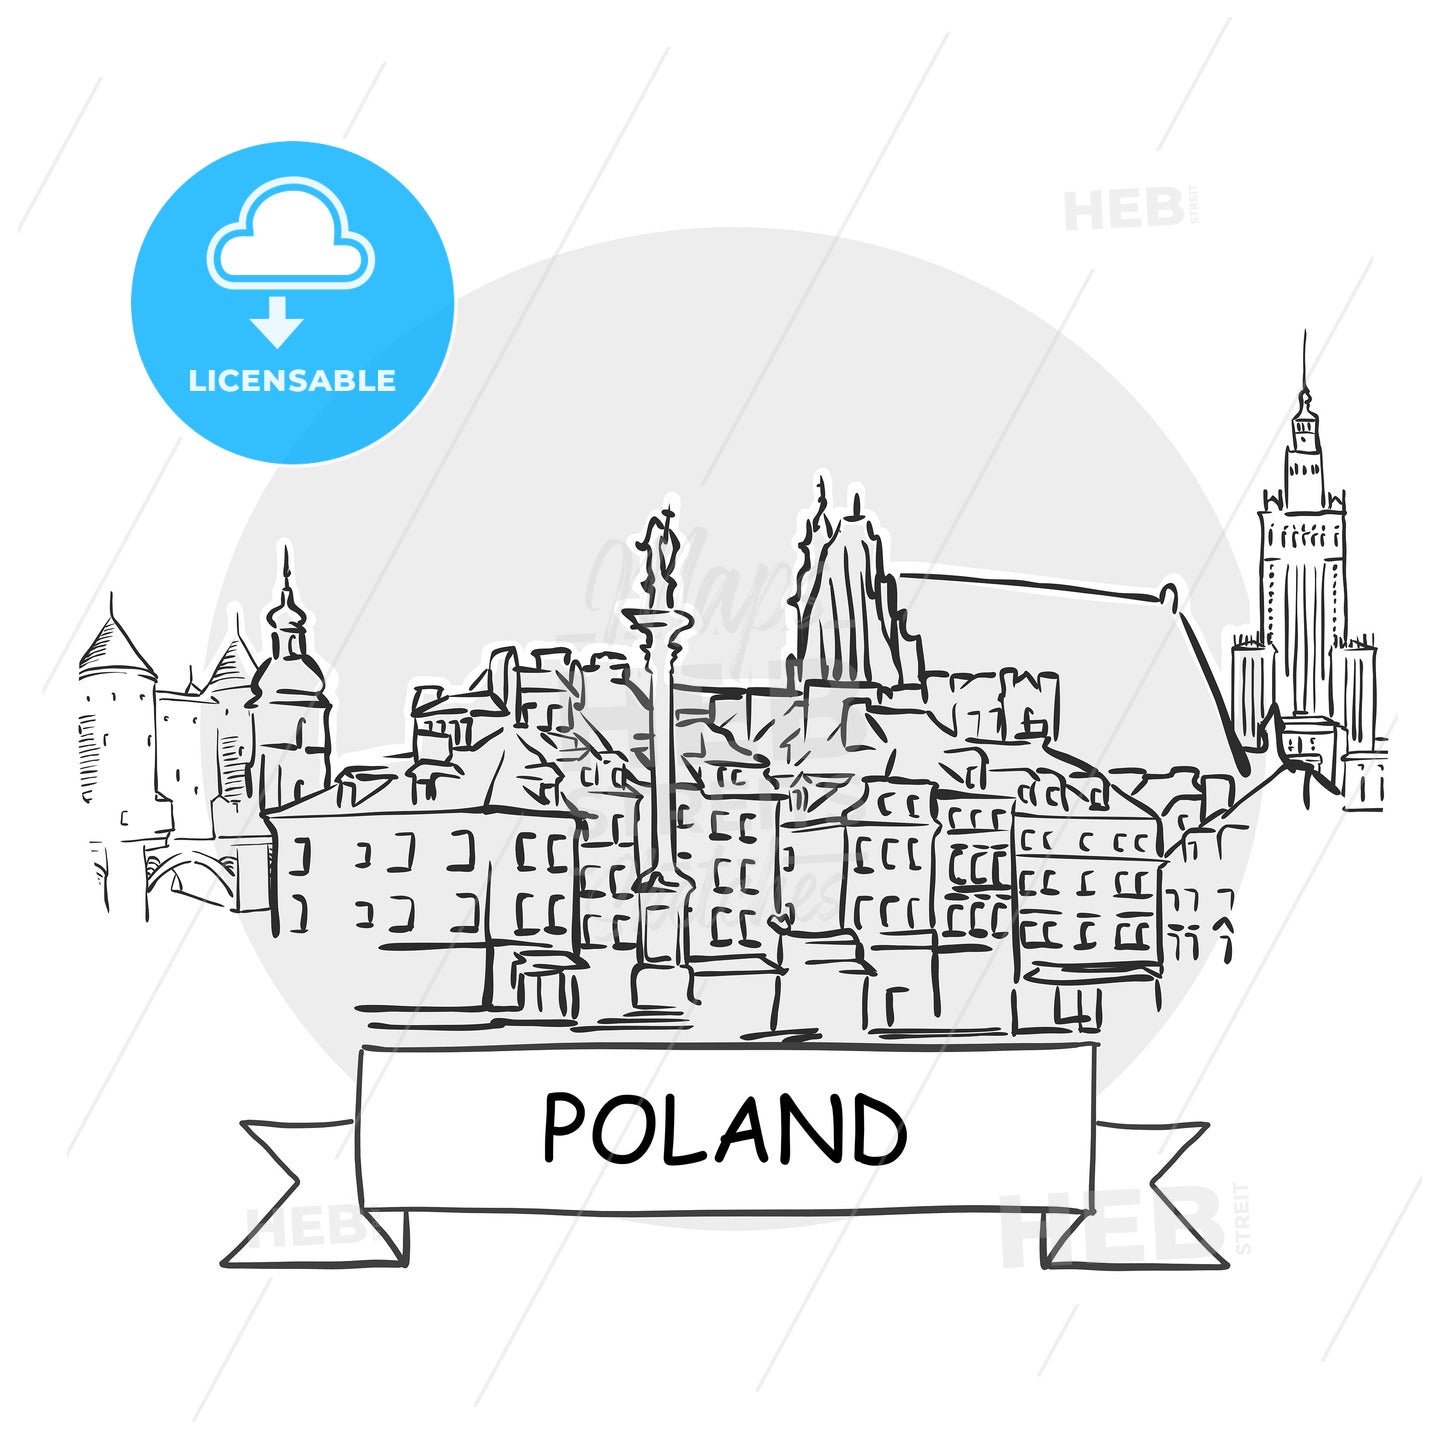 Poland hand-drawn urban vector sign – instant download